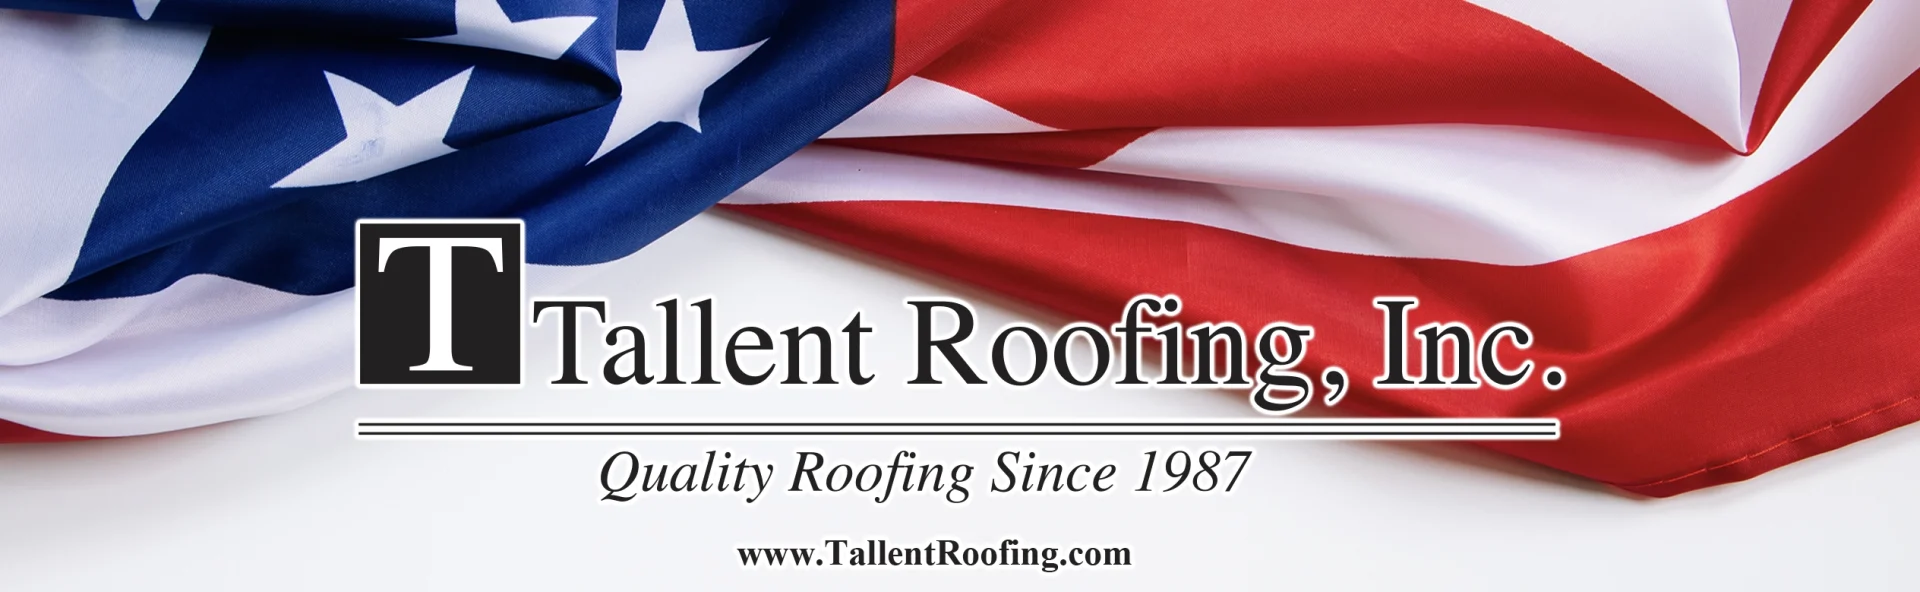 Tallent Roofing Inc Contact Us